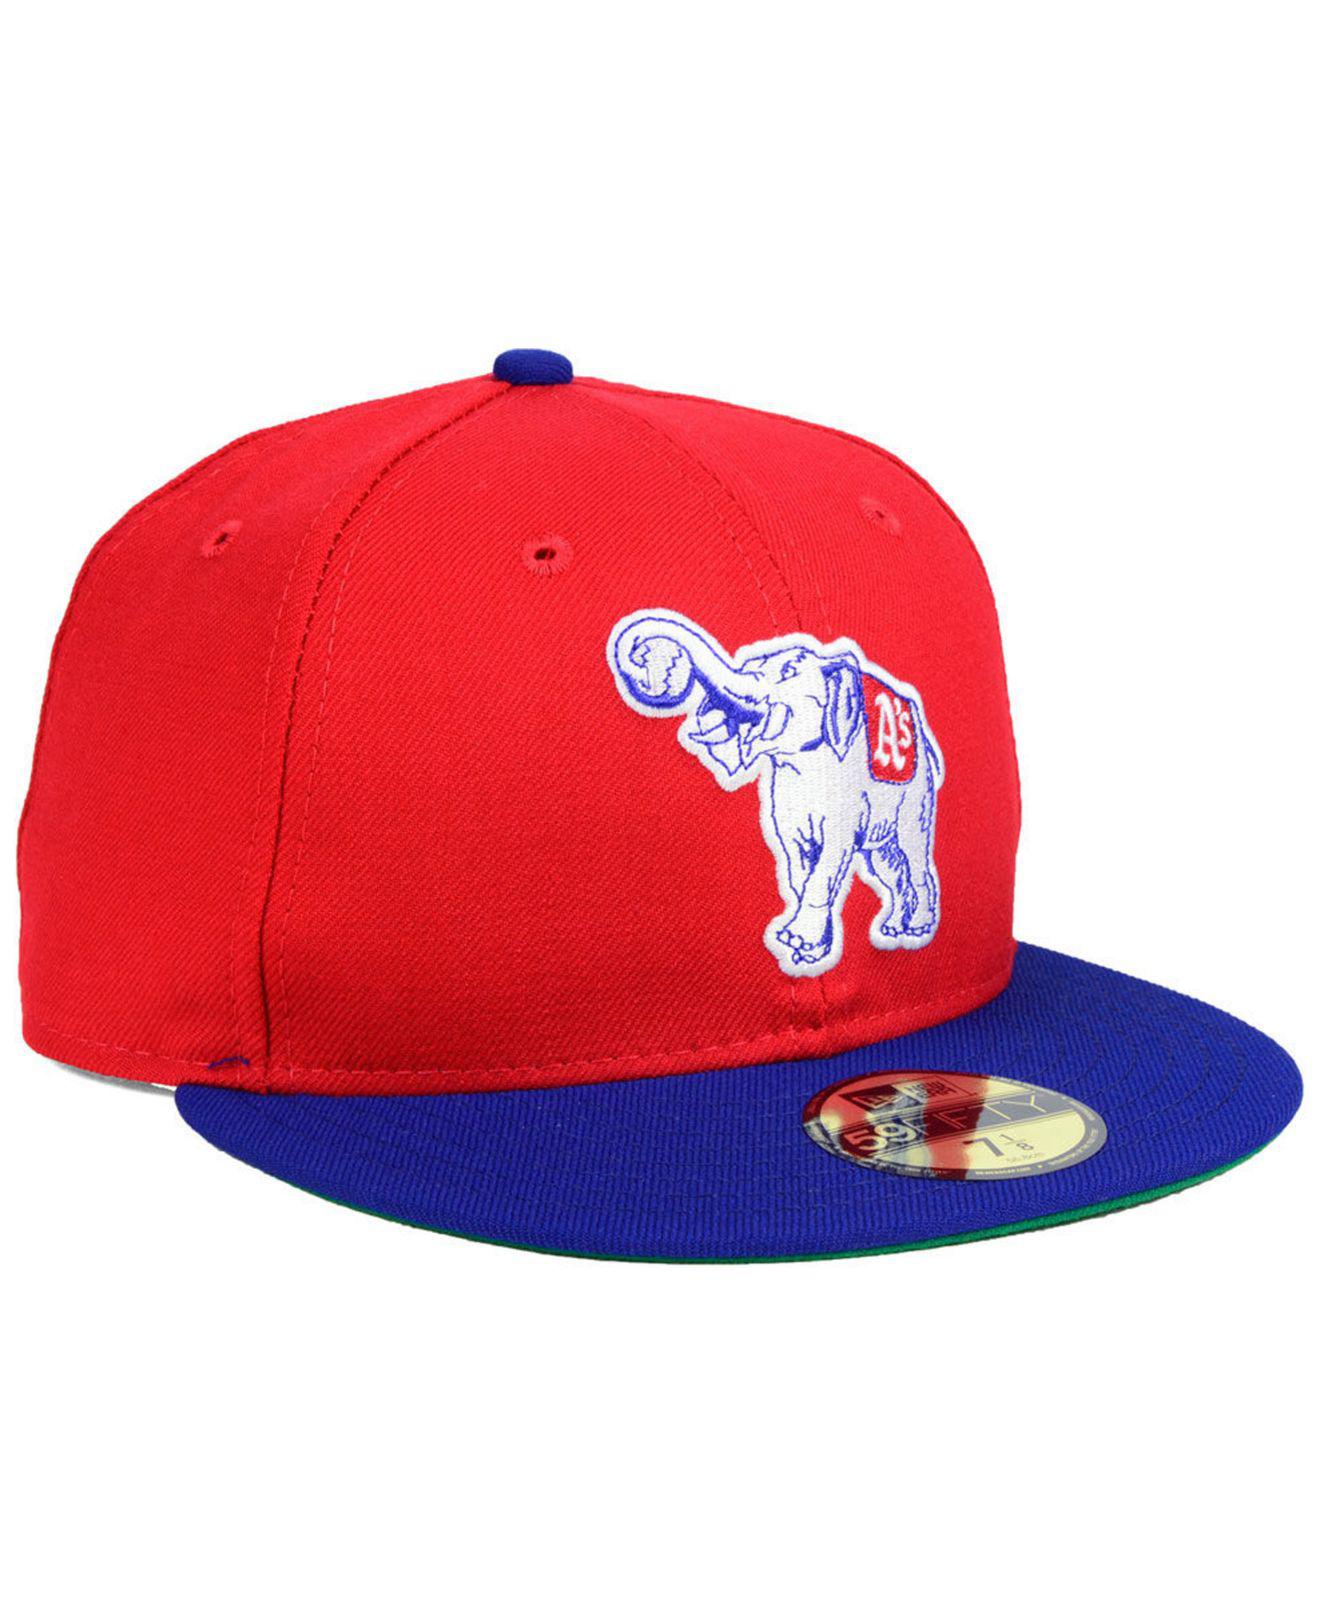 Red and Blue Caps Worn Across Baseball This Weekend – SportsLogos